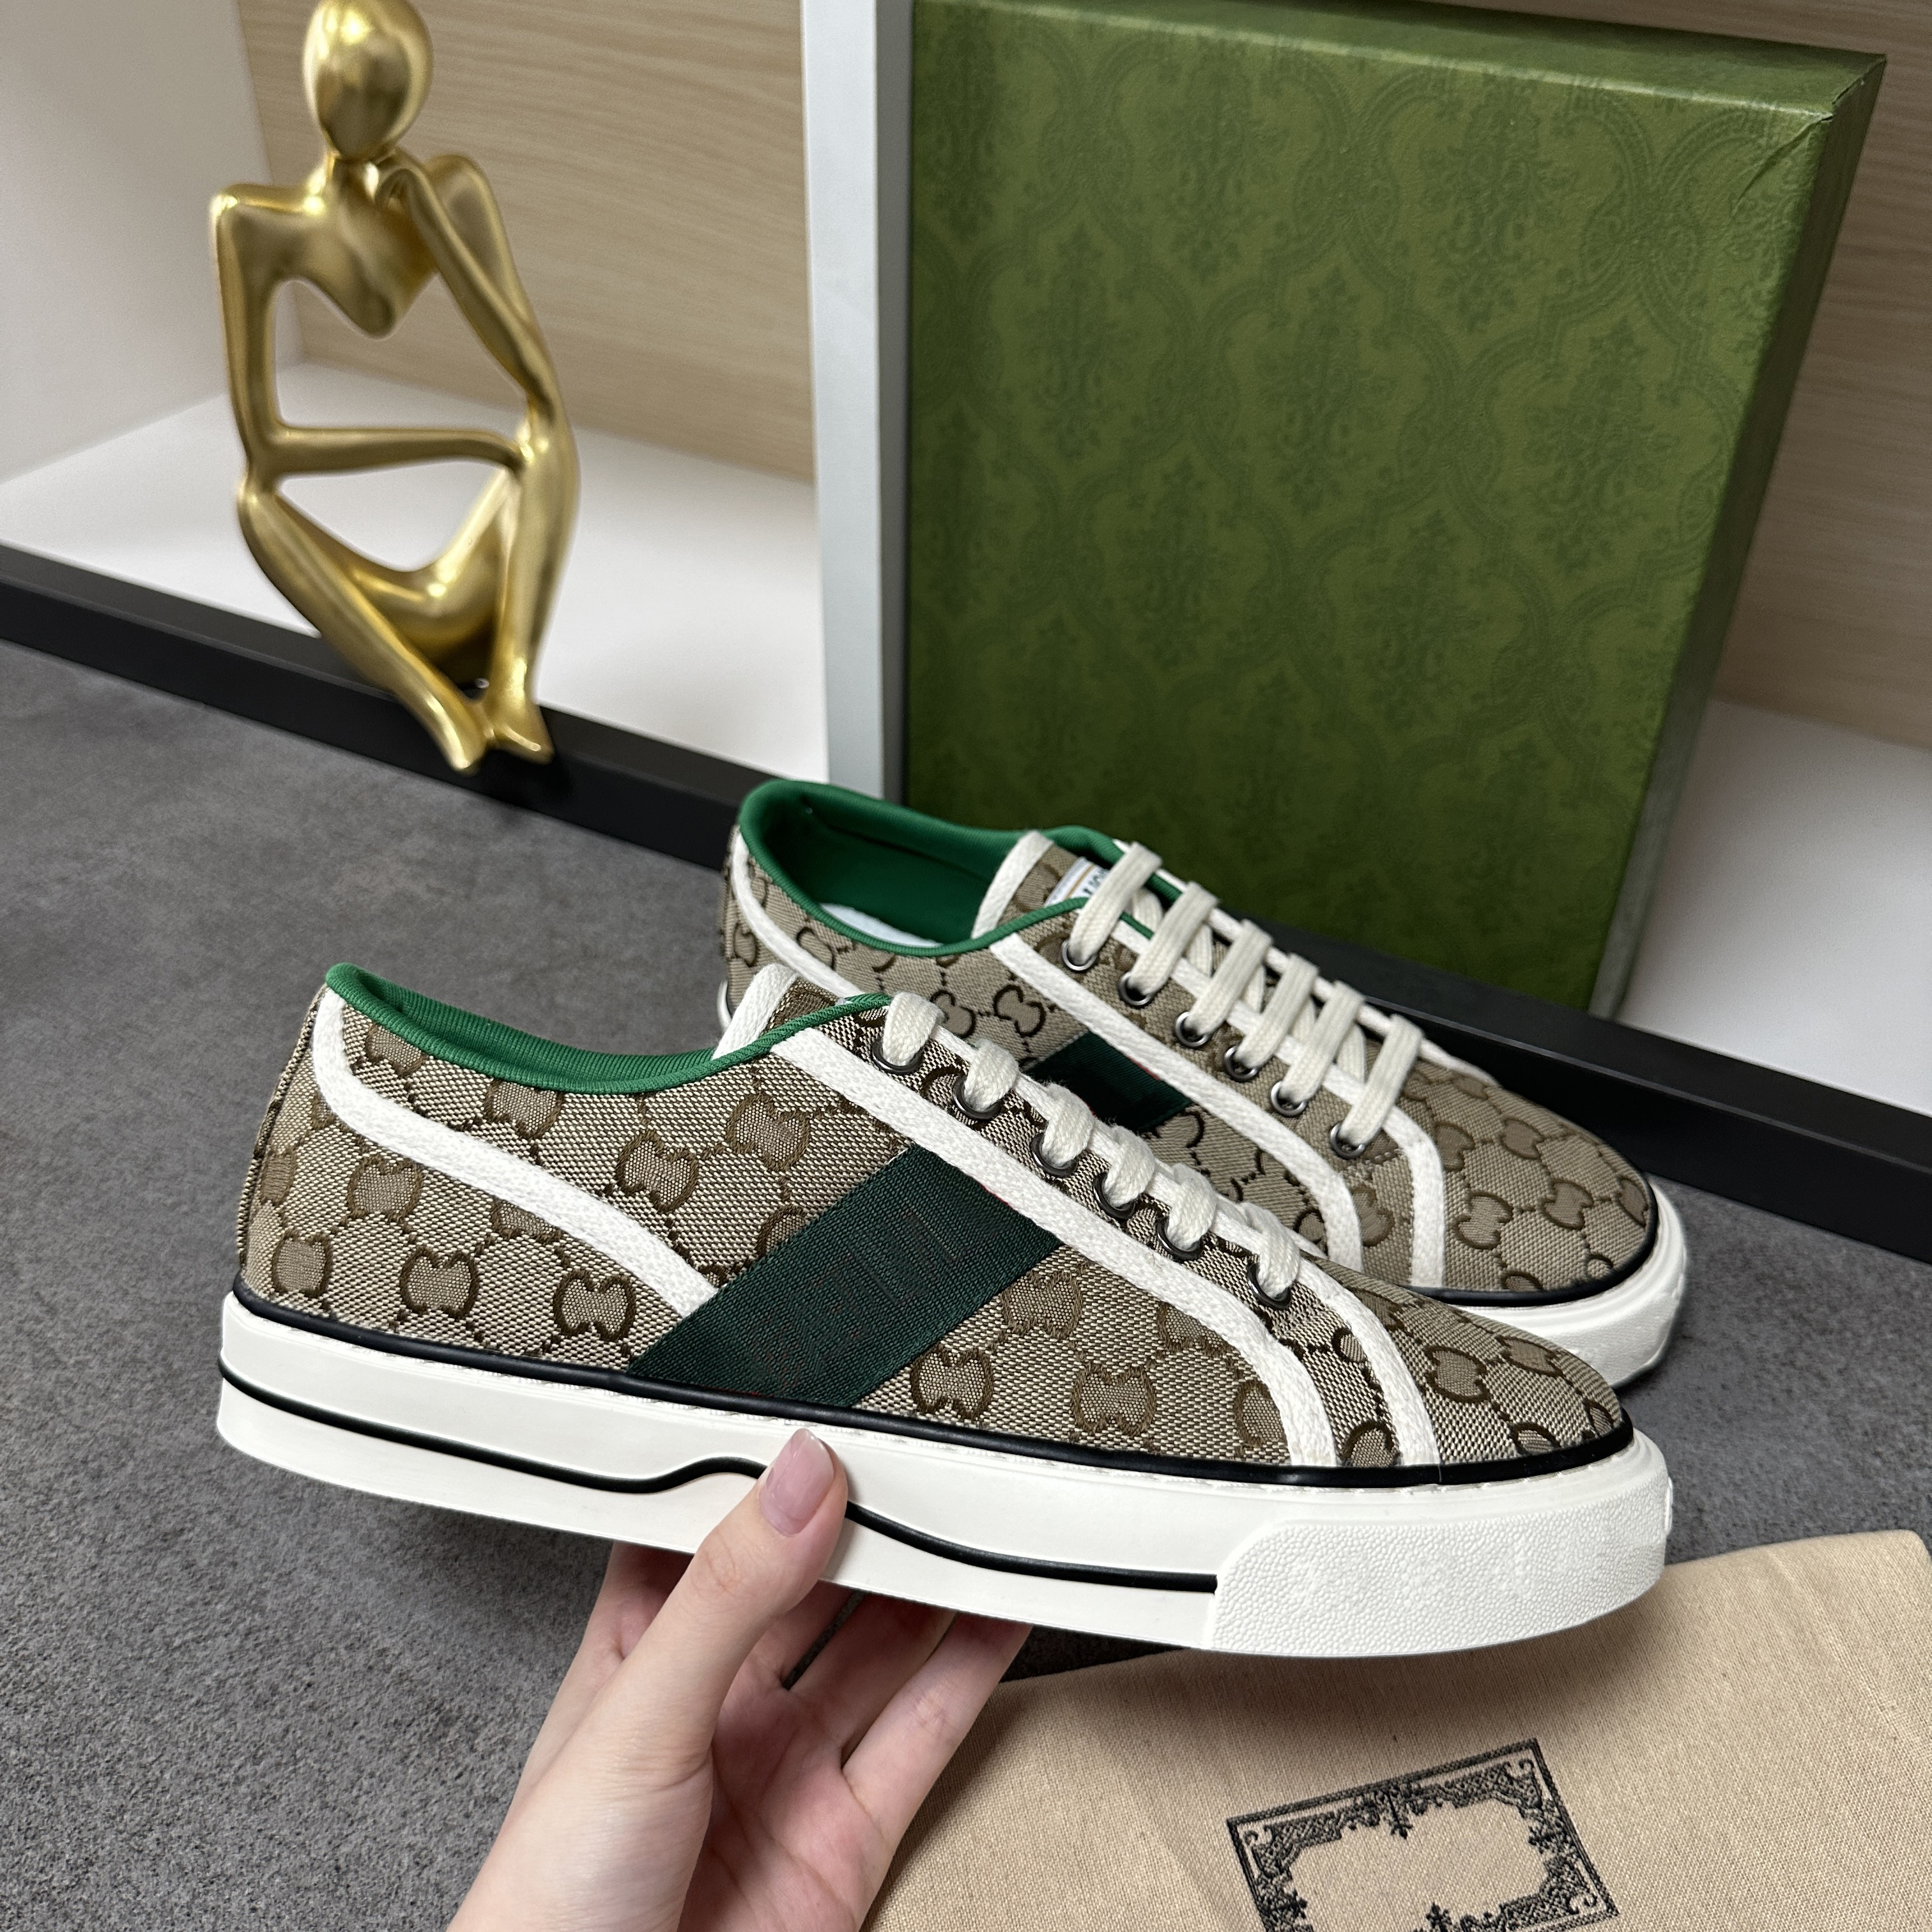 Tennis 1977 Canvas Casual shoes Luxurys Designers Womens Shoe Italy Green And Red Web Stripe Rubber Sole Stretch Cotton Low Top Mens Sneaker